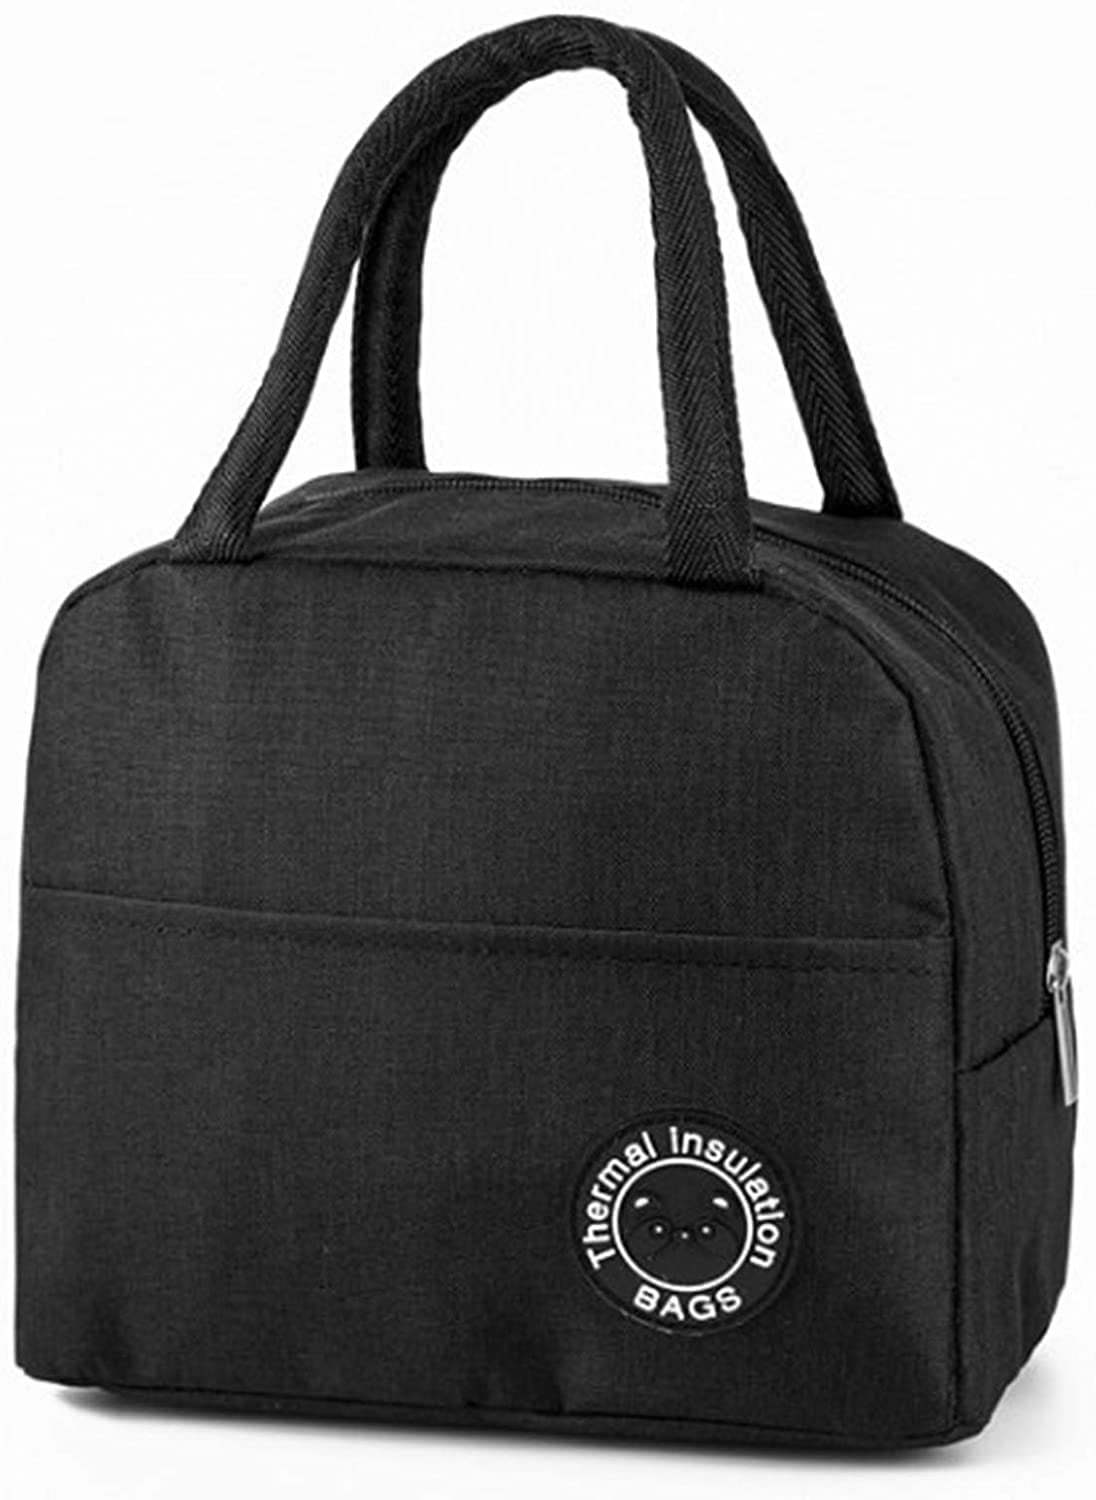 Moyad Lunch Bags for Women Insulated Lunch Bag Tote Adult Lunch Box Cooler Purse for Work 12L Black